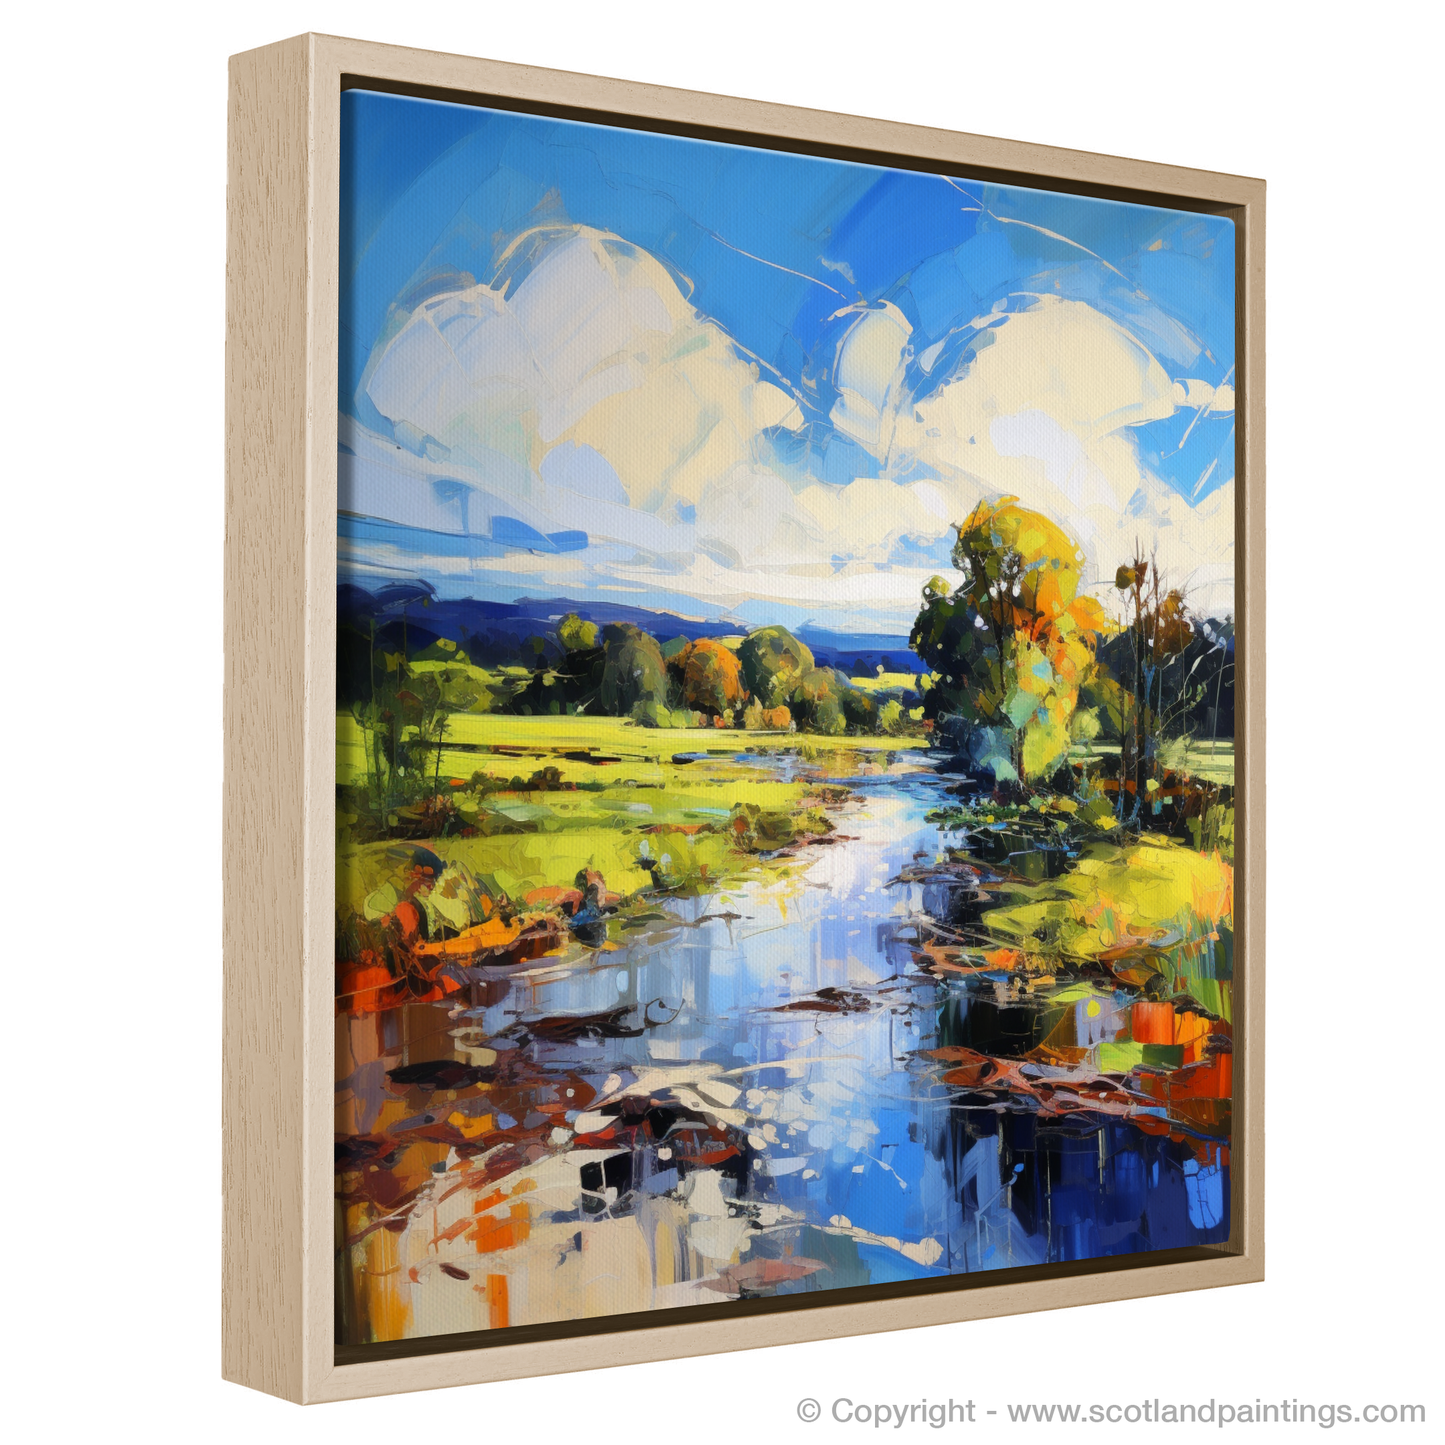 Painting and Art Print of River Leven, West Dunbartonshire entitled "River Leven Reverie: An Expressionist Ode to Scottish Waters".